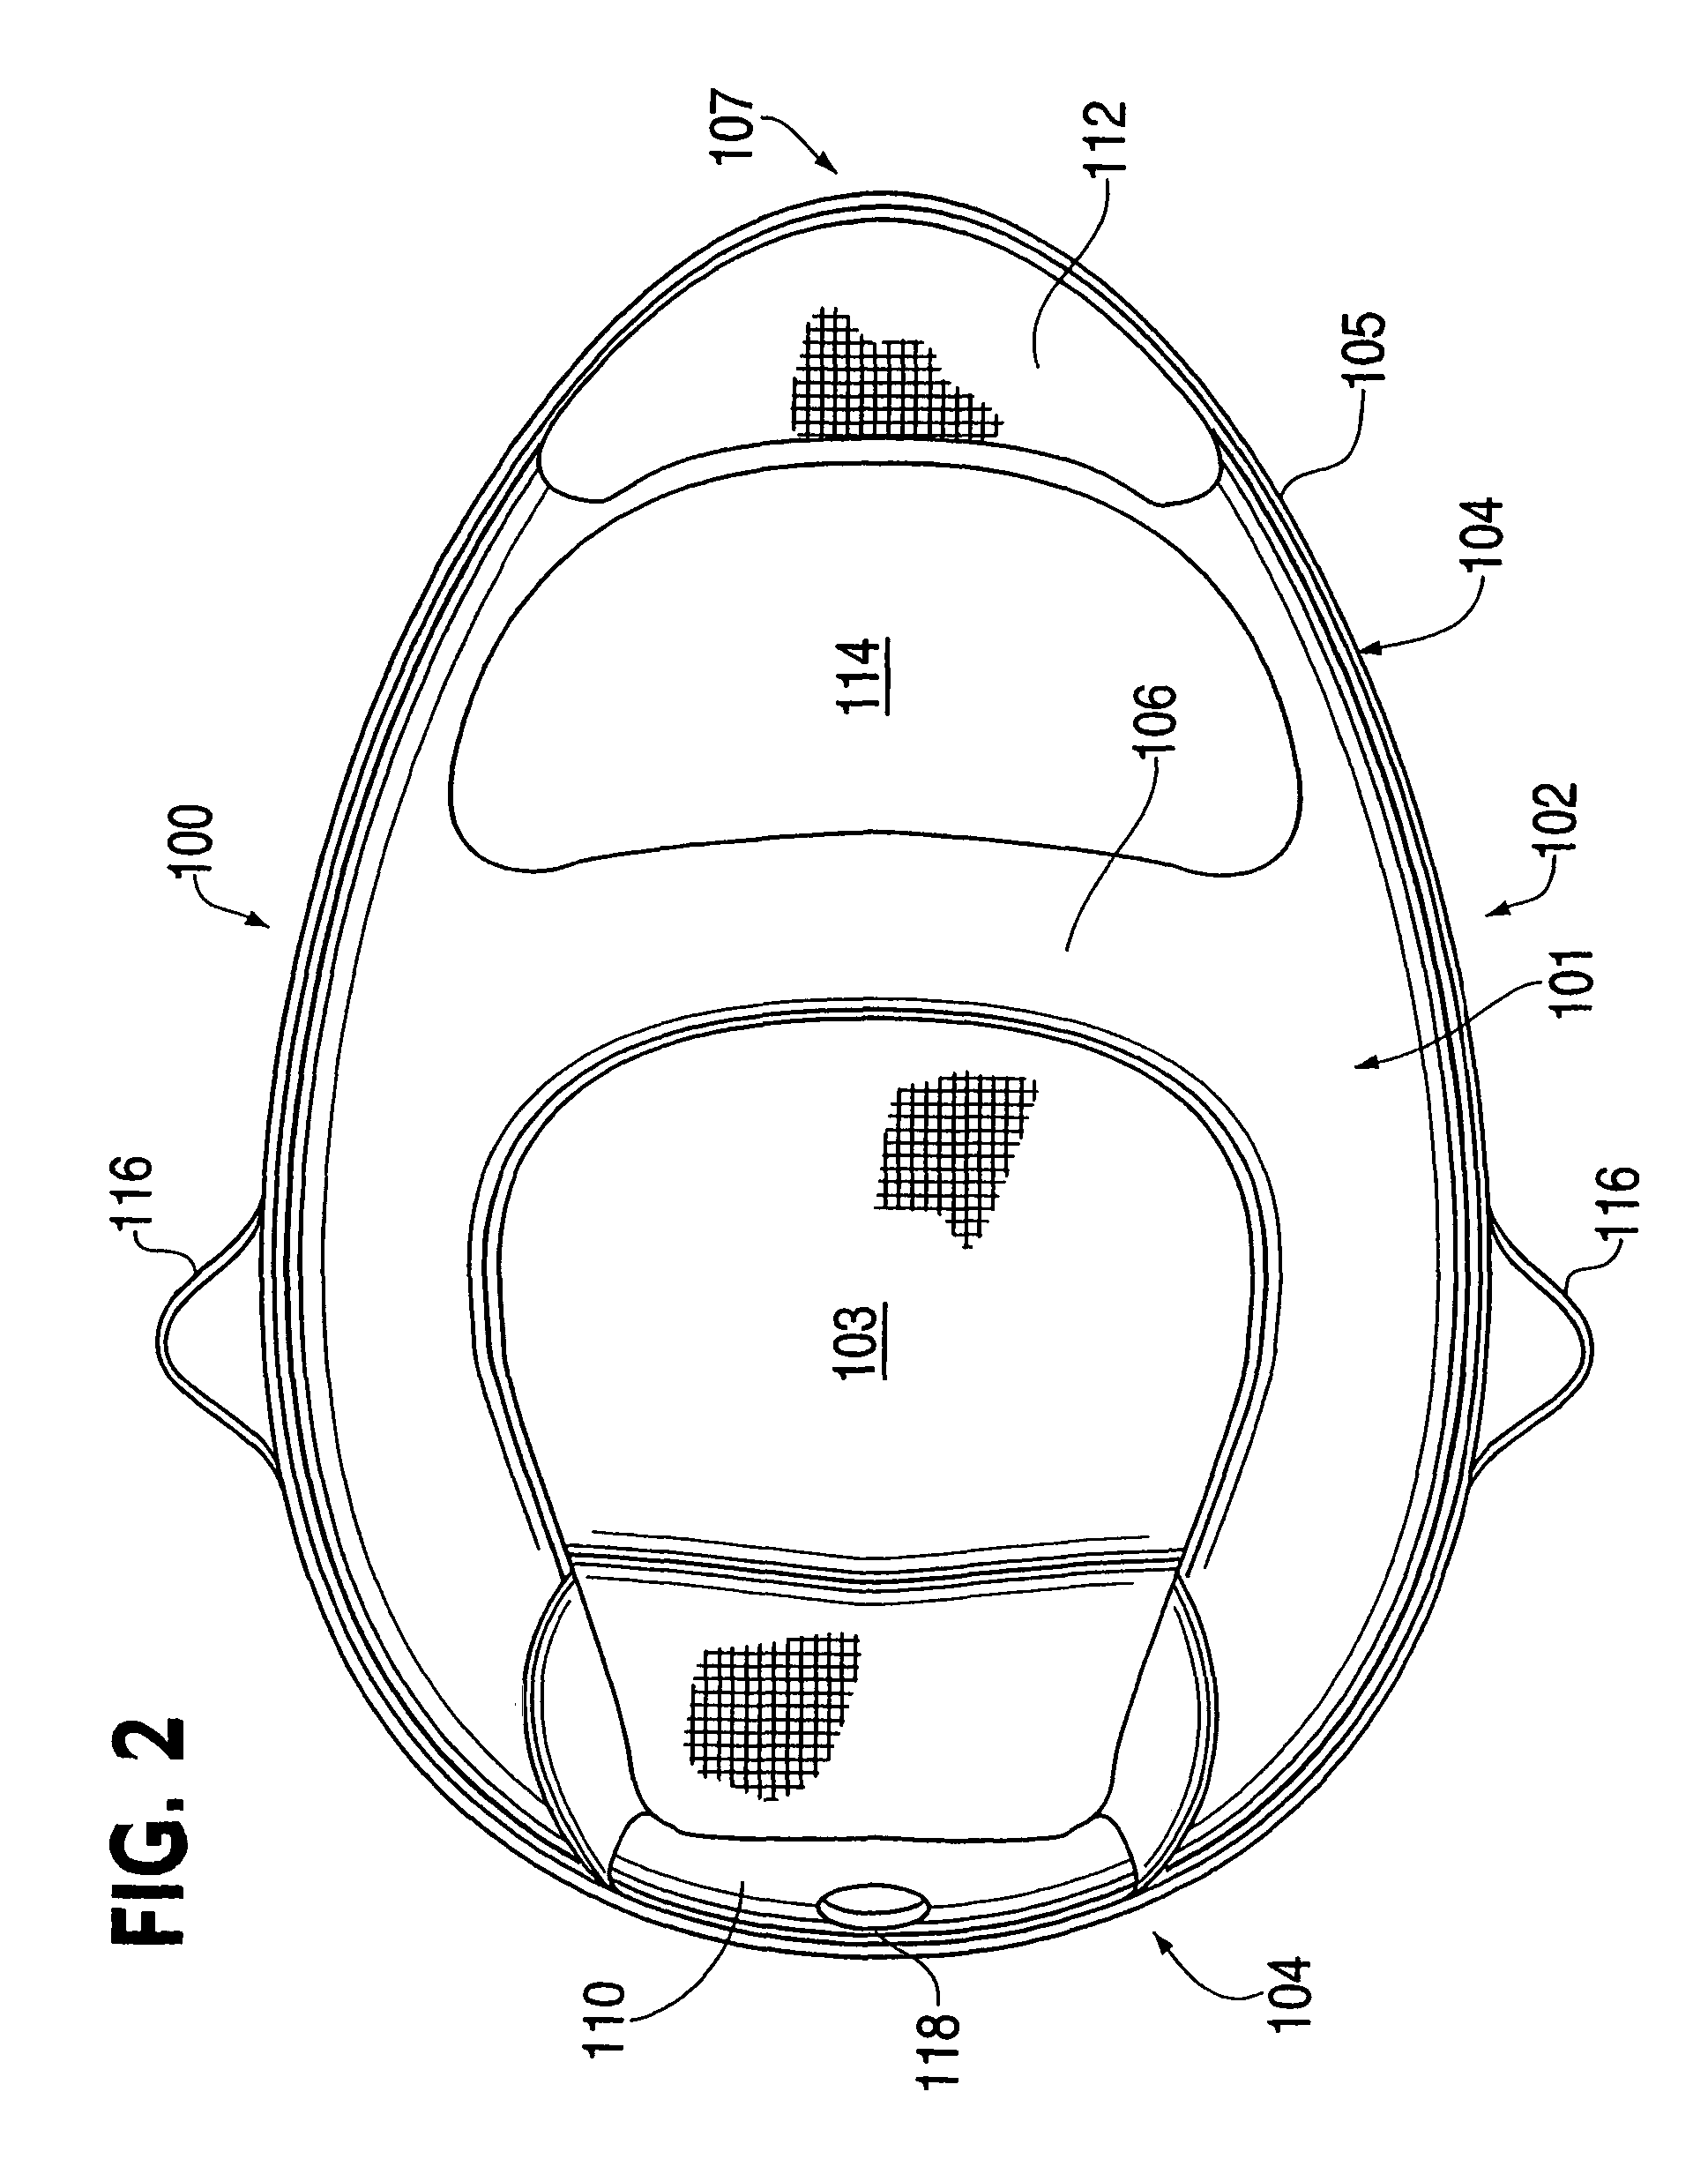 Collapsible flotation device having back support member